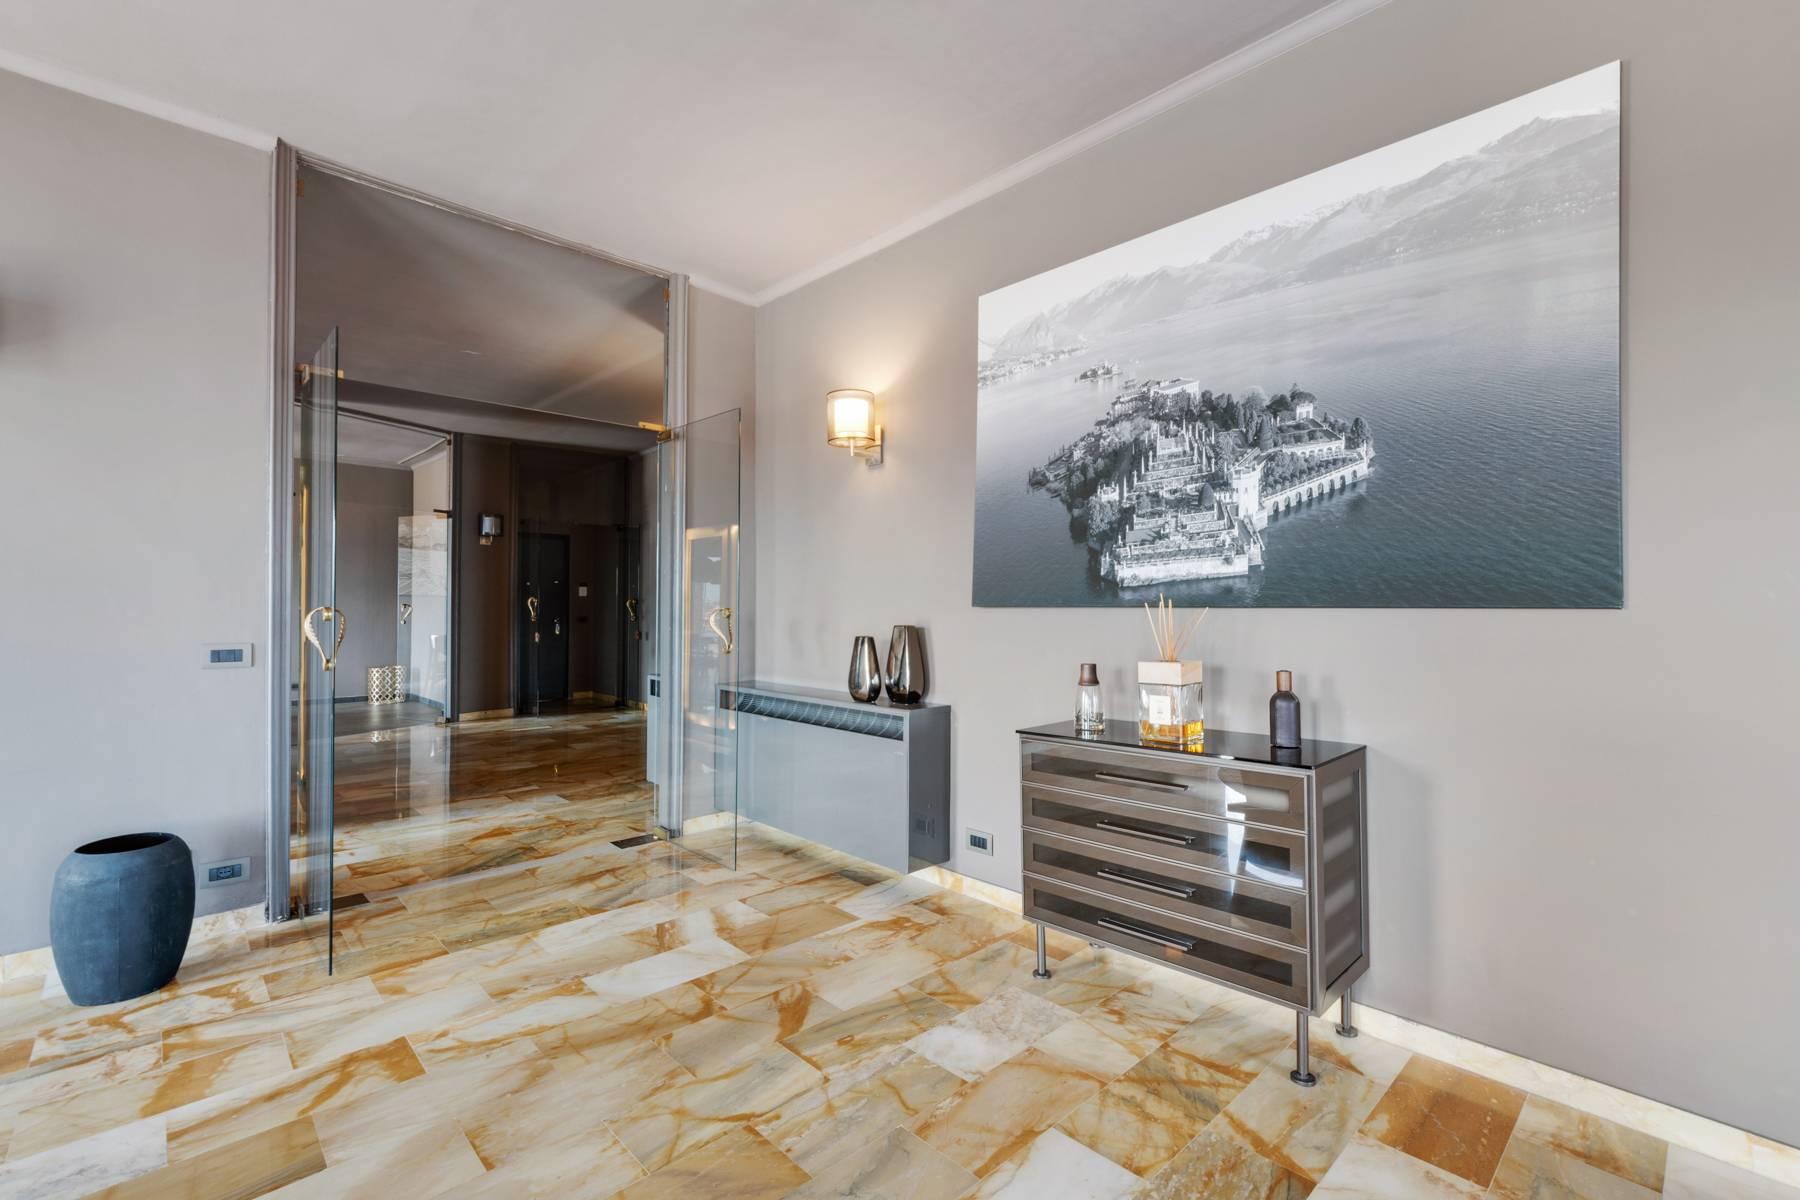 Breathtaking penthouse with balcony and terrace overlooking all the lake Maggiore located in the center of Intra - 15